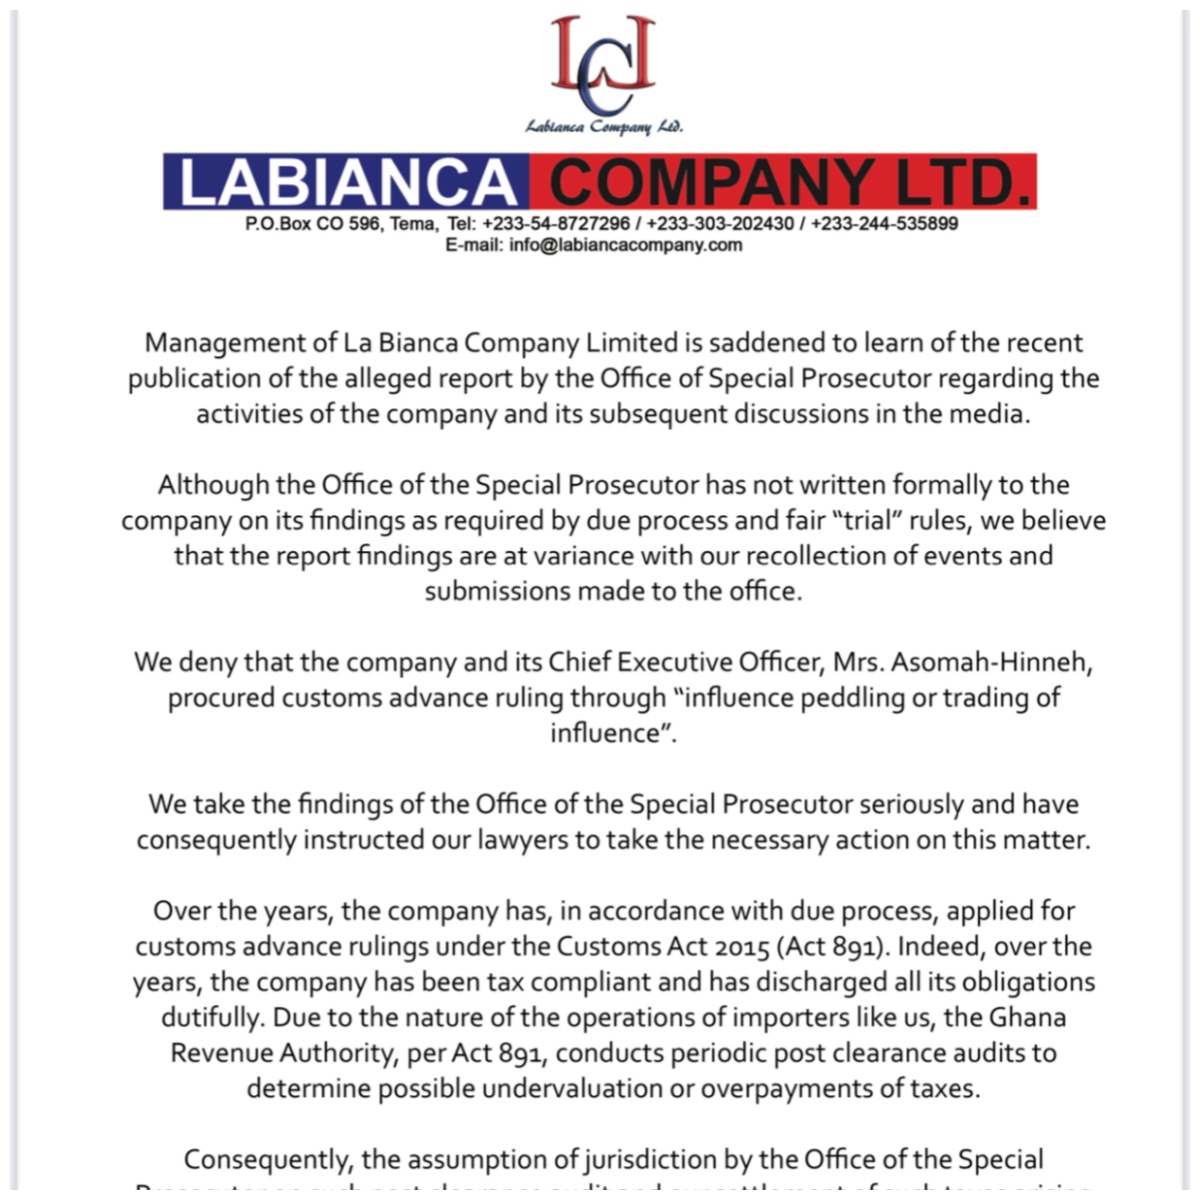 Labianca's statement on the allegations by the OSP